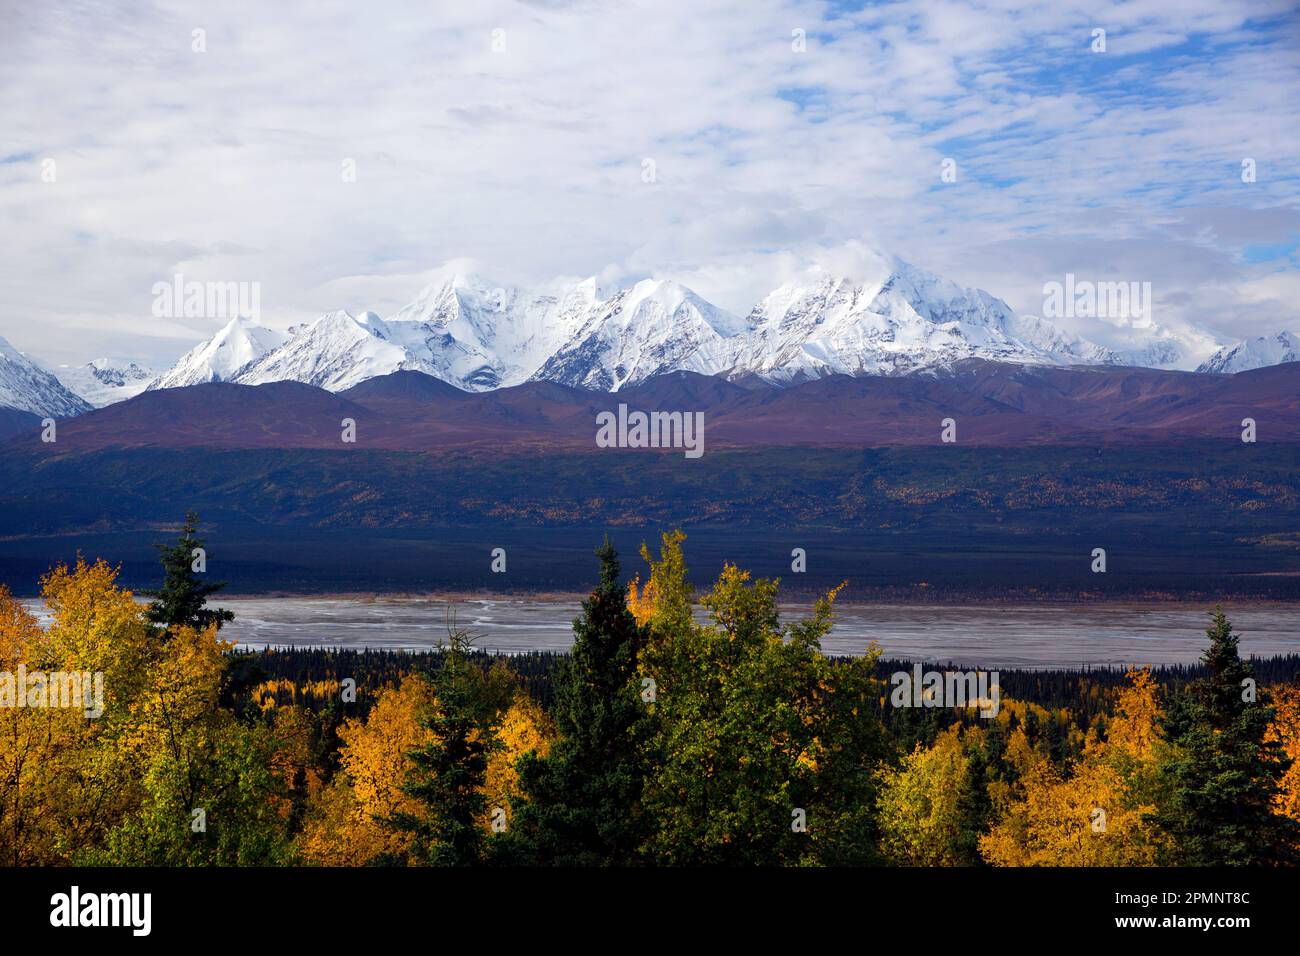 Stunning autumn view of the Rainbow Ridge Mountains with McCallum Creek in the foreground; Alaska, United States of America Stock Photo